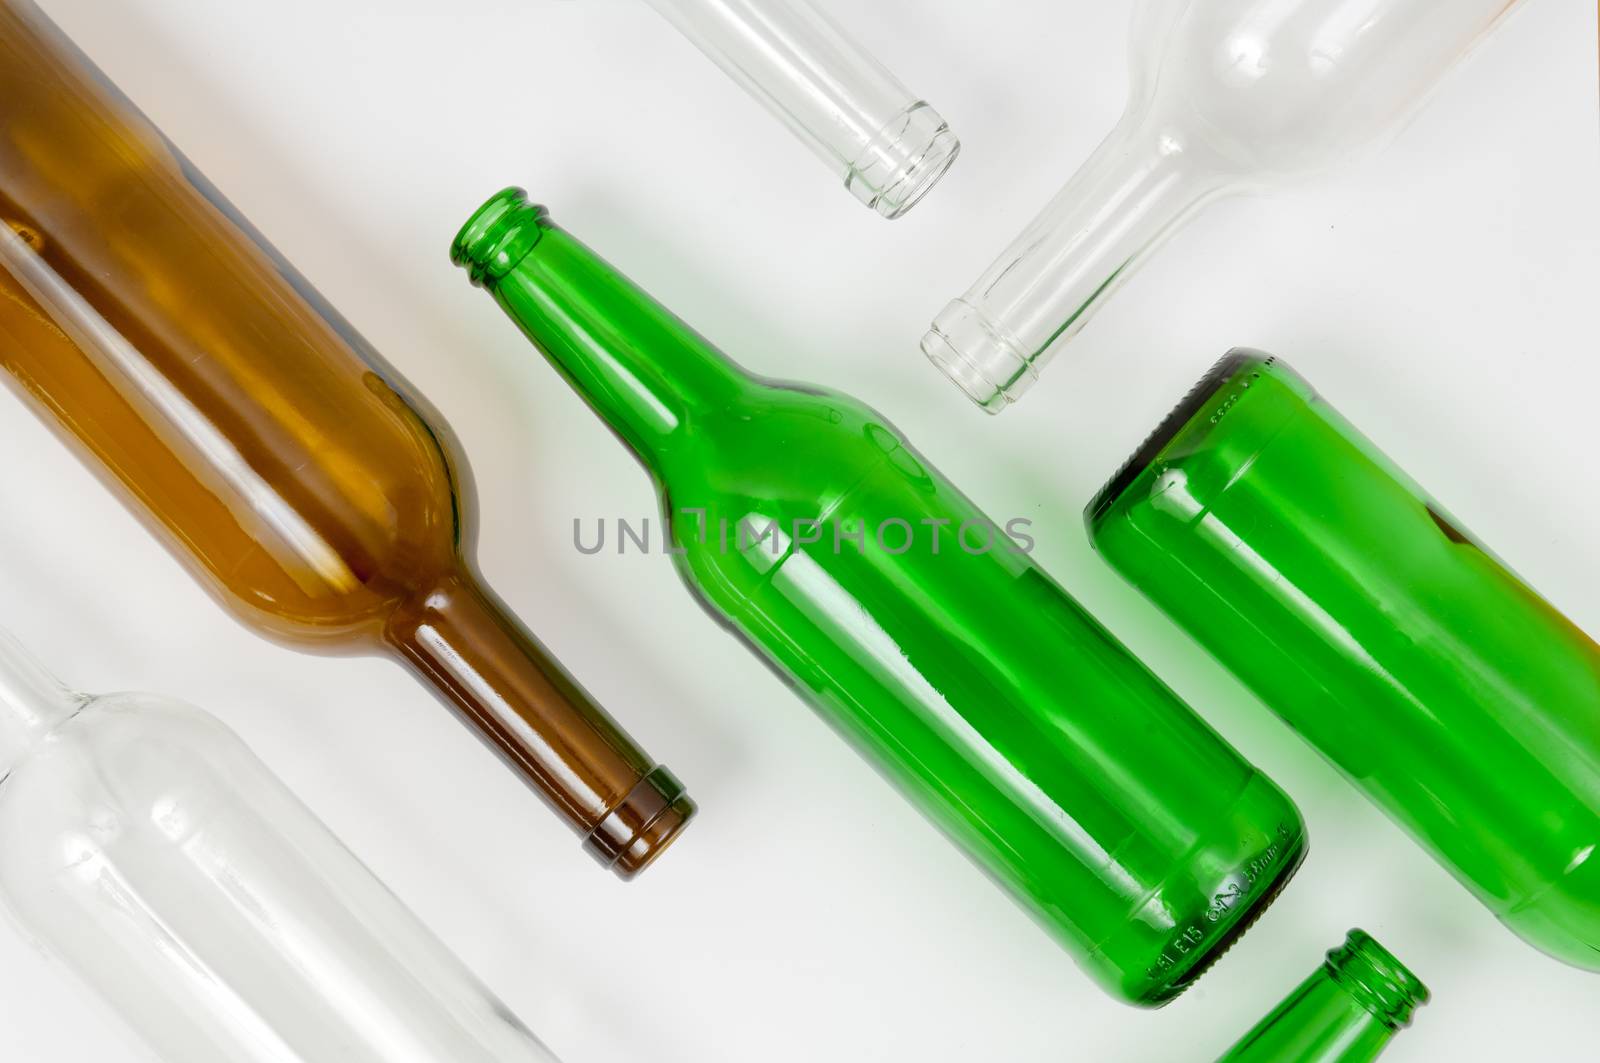 Empty glass bottles of mixed colors including green, clear white, brown